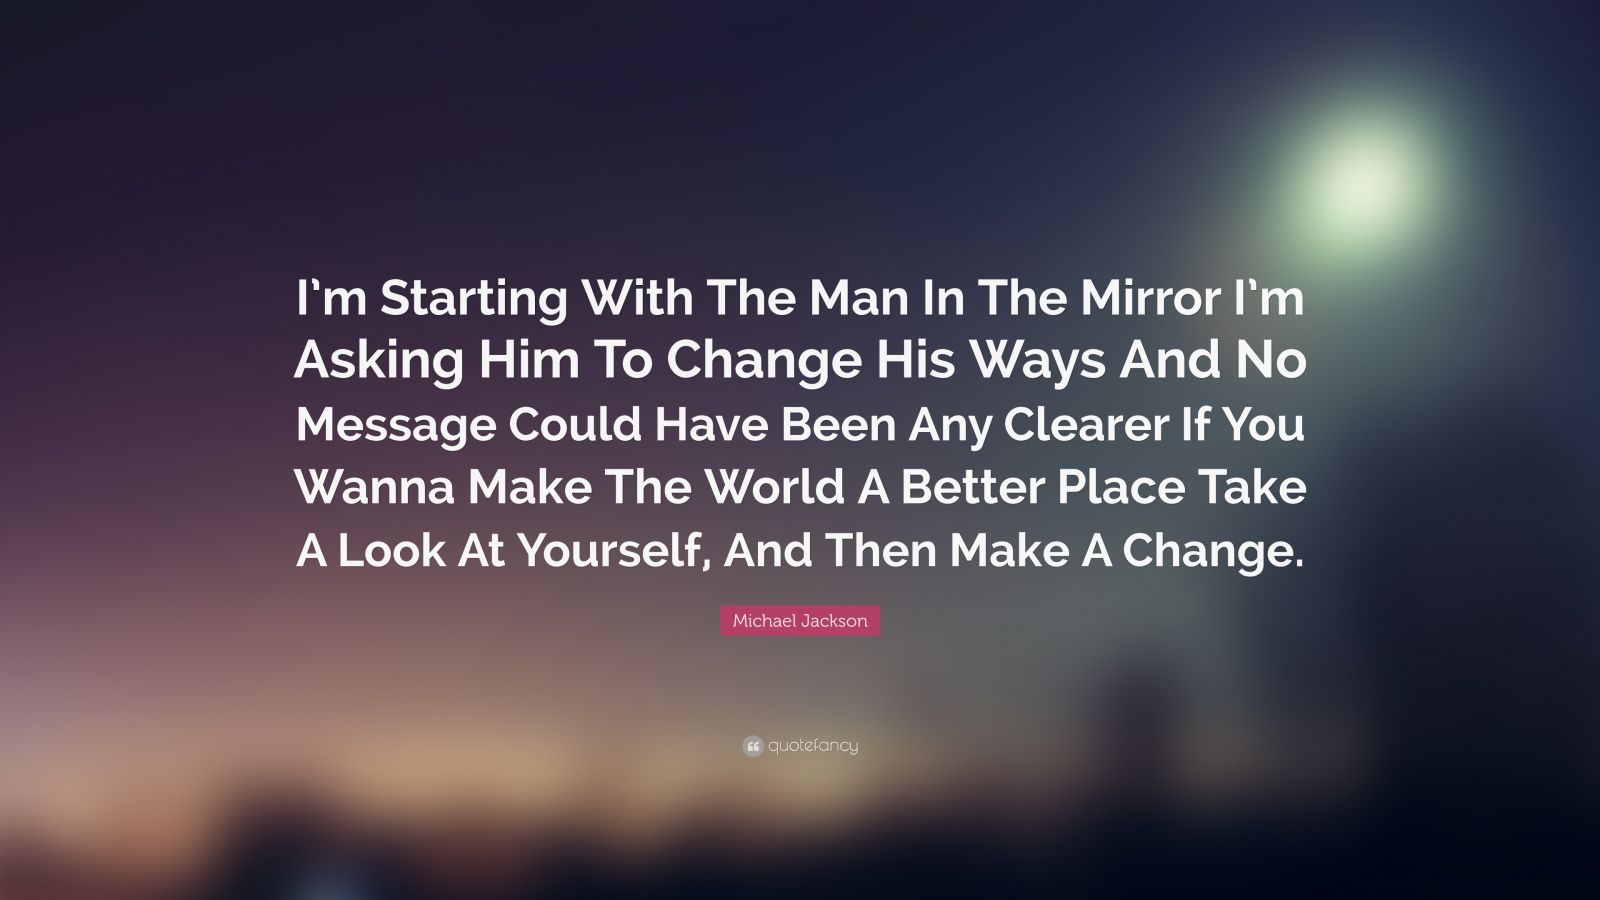 Michael Jackson Quote: “I’m Starting With The Man In The Mirror I’m